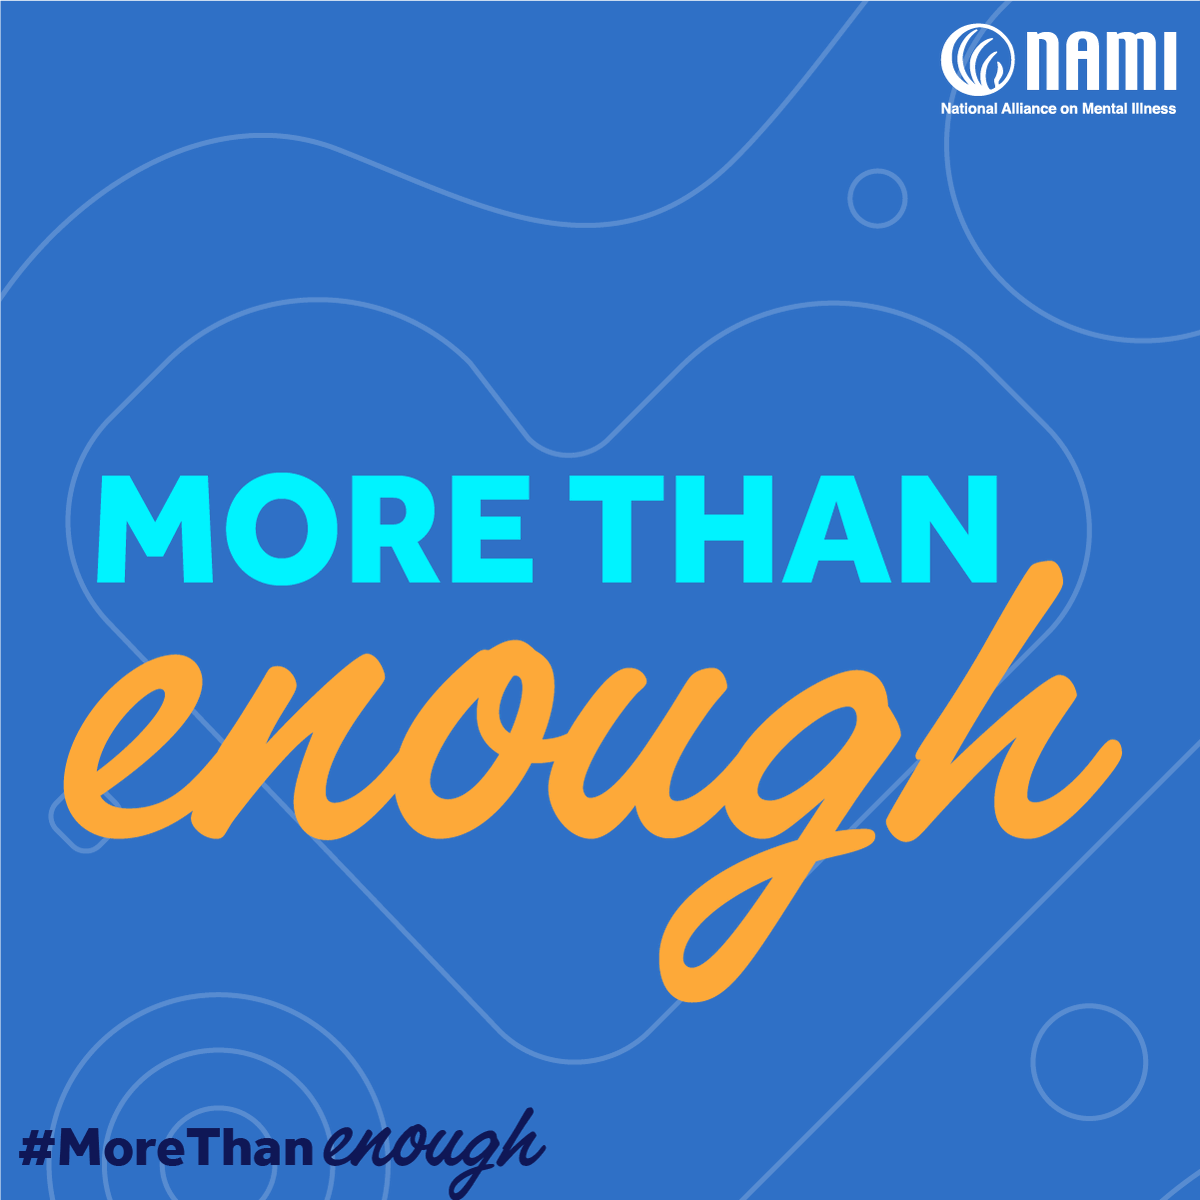 Mental health isn't a once-a-year topic, it's a daily journey. At Array, we're here for each other, and for those beyond our team, don't hesitate to reach out to @NAMICommunicate if you need support: nami.org/help. Your mental health matters. #MoreThanEnough